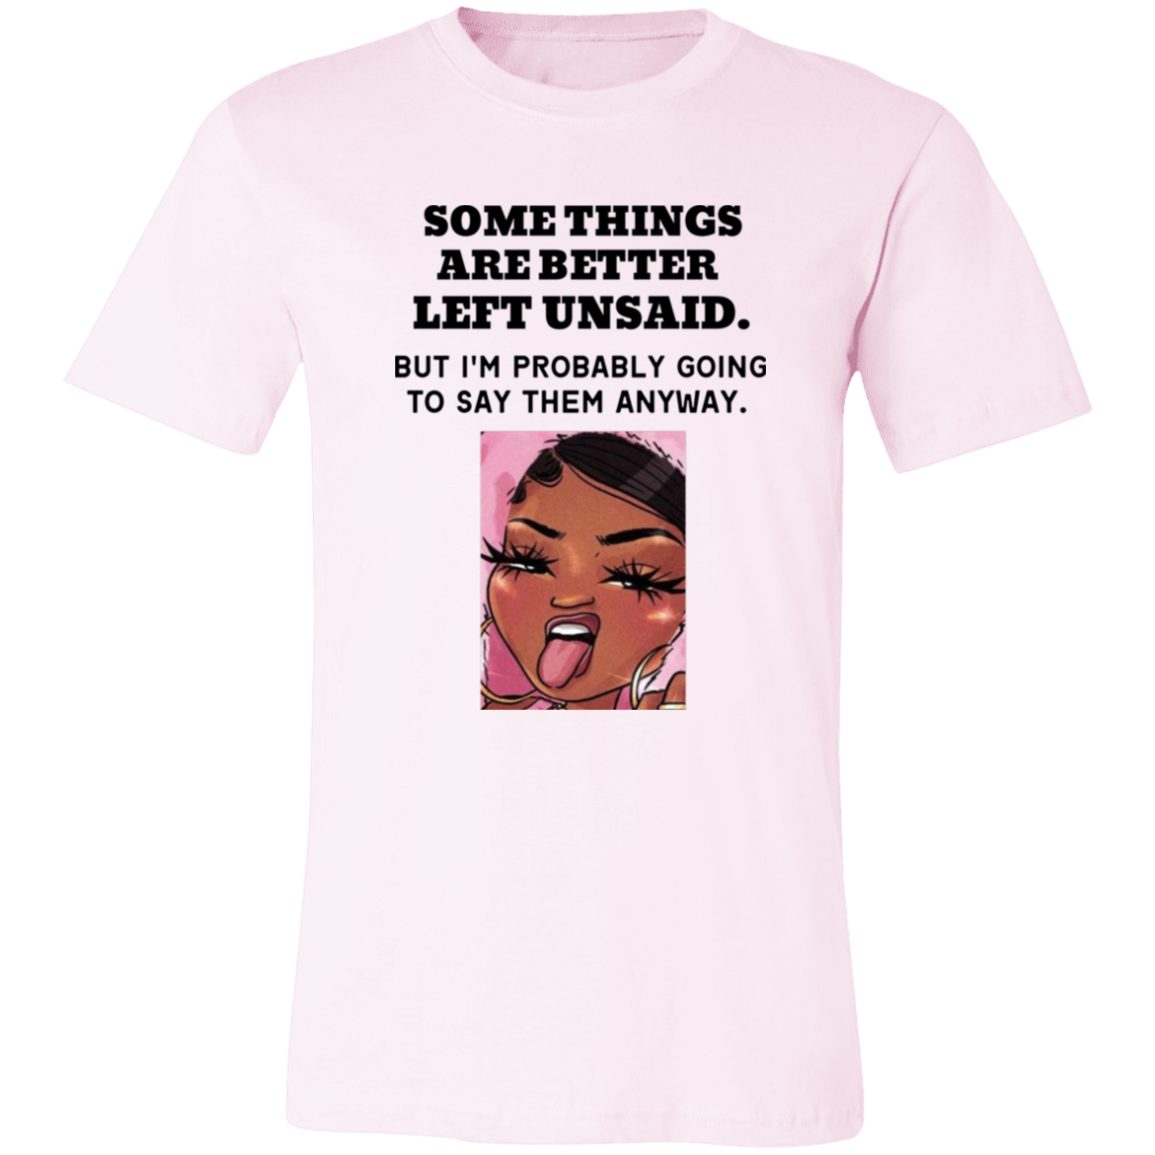 Some Things Are Better Left Unsaid Unisex Jersey Short-Sleeve T-Shirt, Funny Quote Shirts, Feminist Shirt, Novelty T-shirt, Sarcastic T-shirt